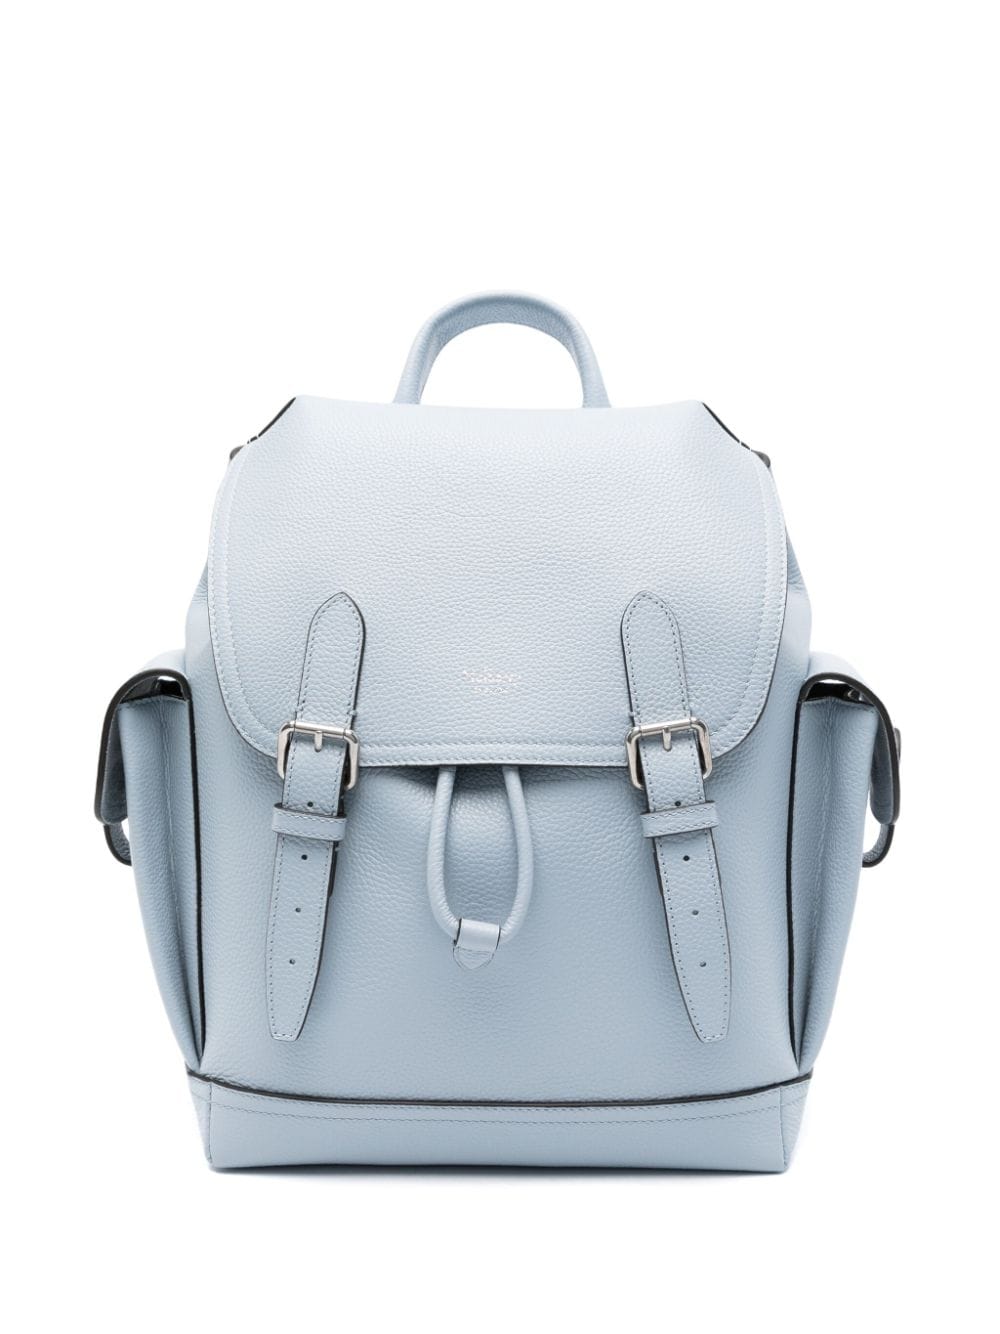 Mulberry mini Heritage backpack - Blue von Mulberry